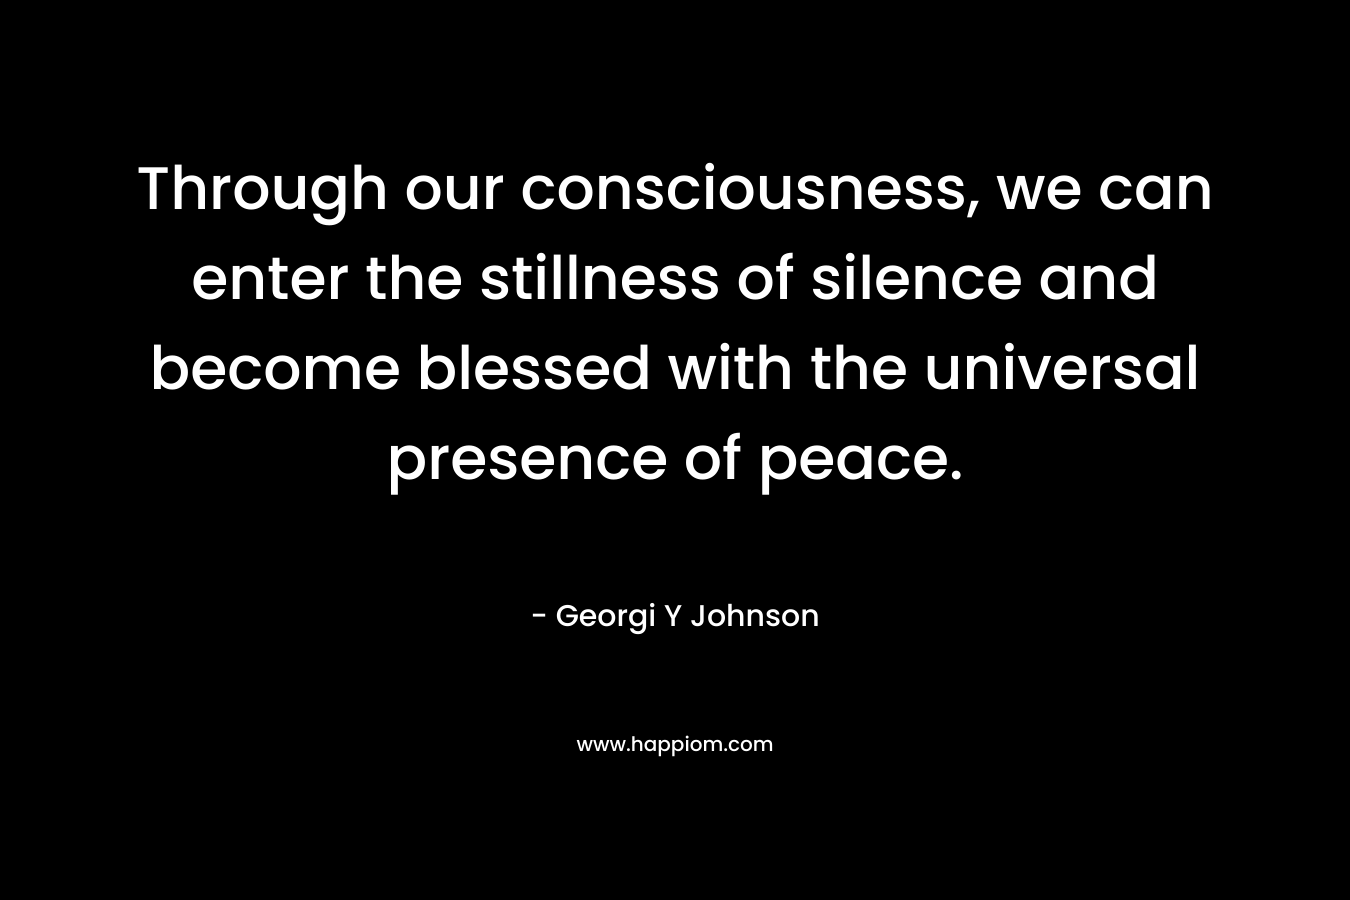 Through our consciousness, we can enter the stillness of silence and become blessed with the universal presence of peace. – Georgi Y Johnson